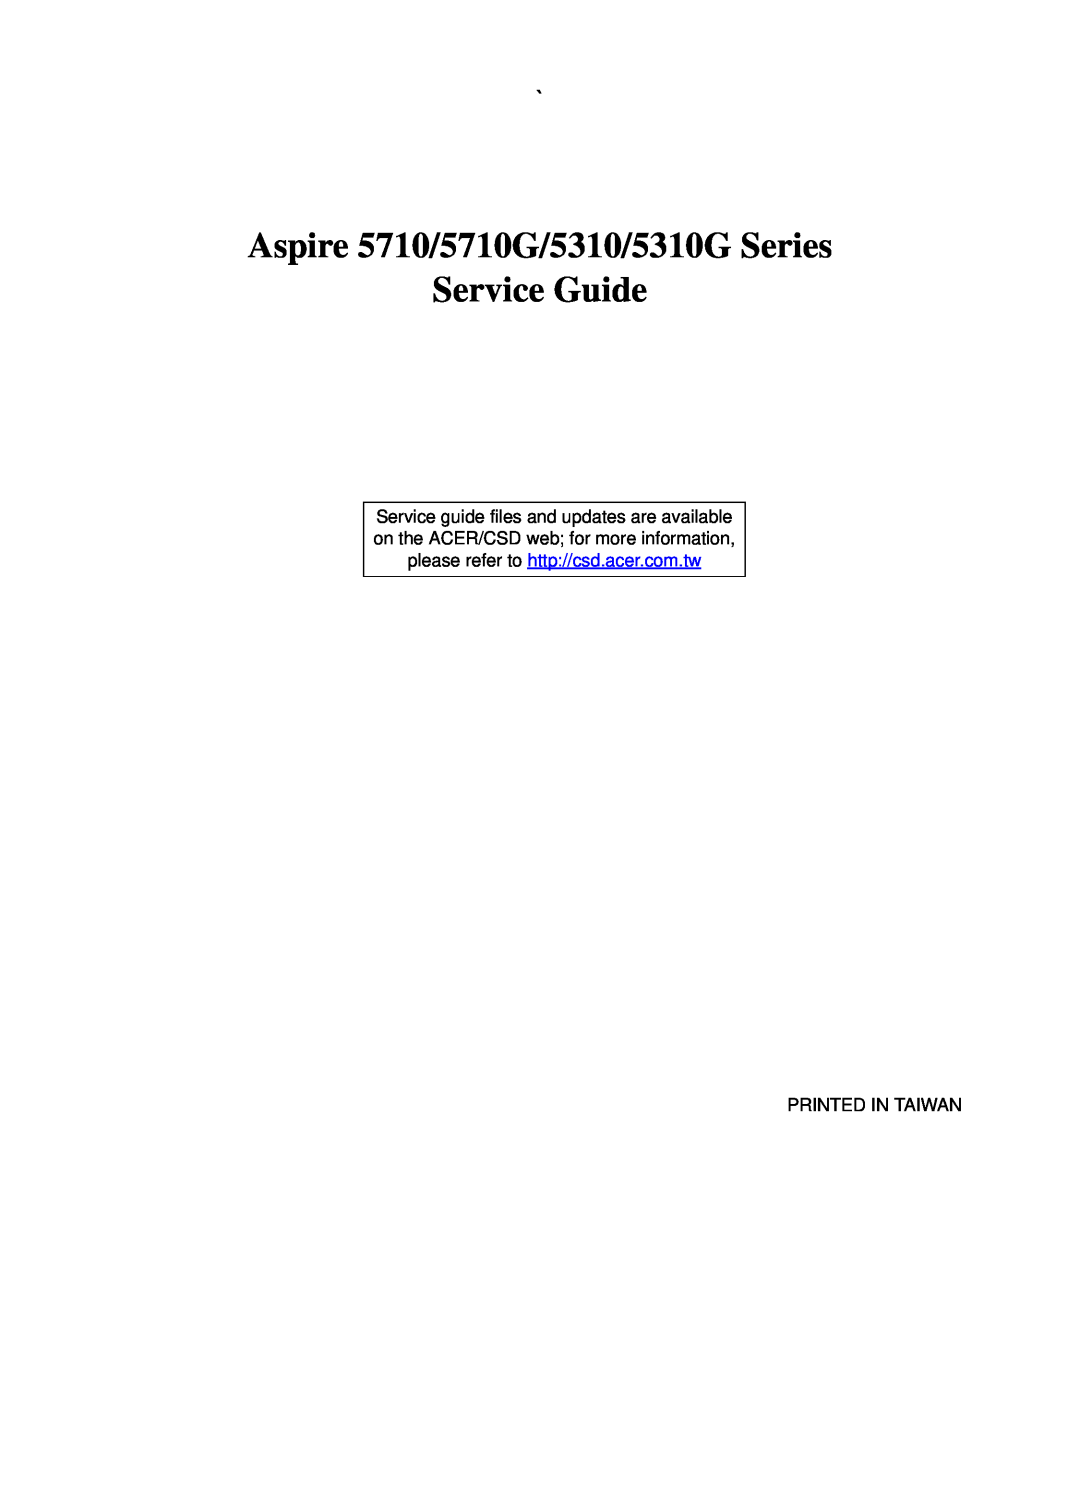 Acer manual Aspire 5710/5710G/5310/5310G Series Service Guide 